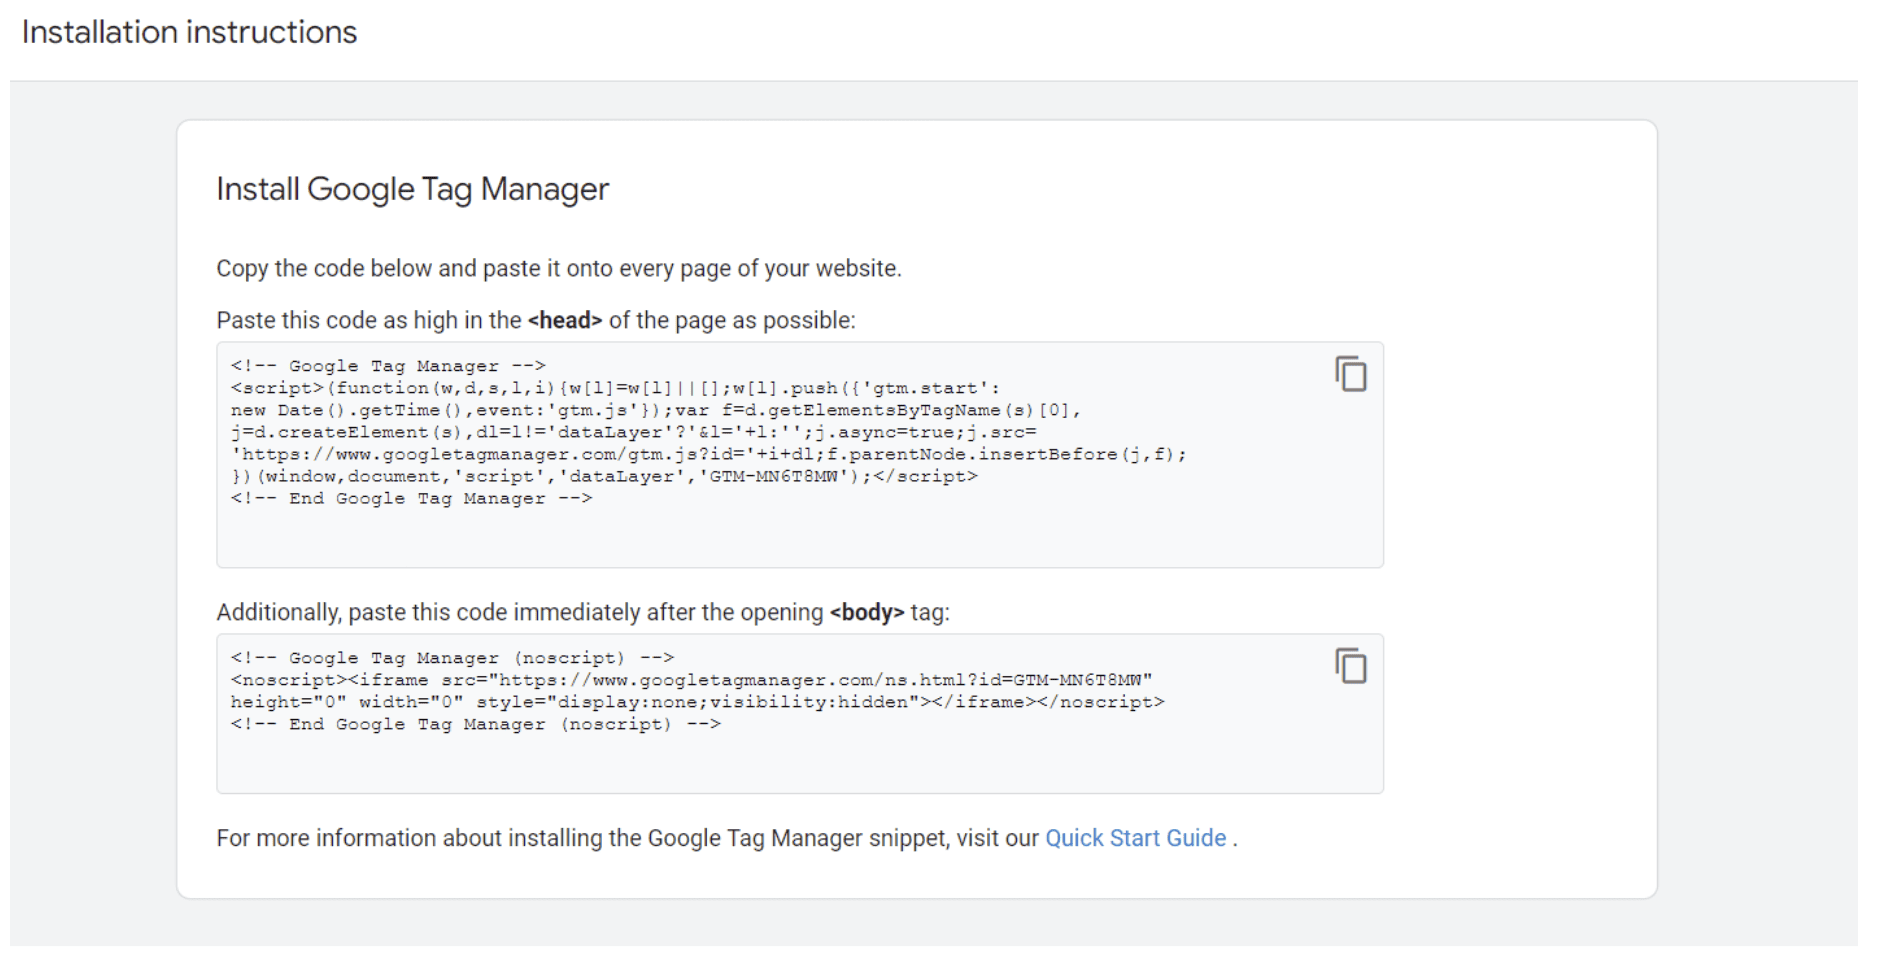 Intallation instruction for Google Tag Manager